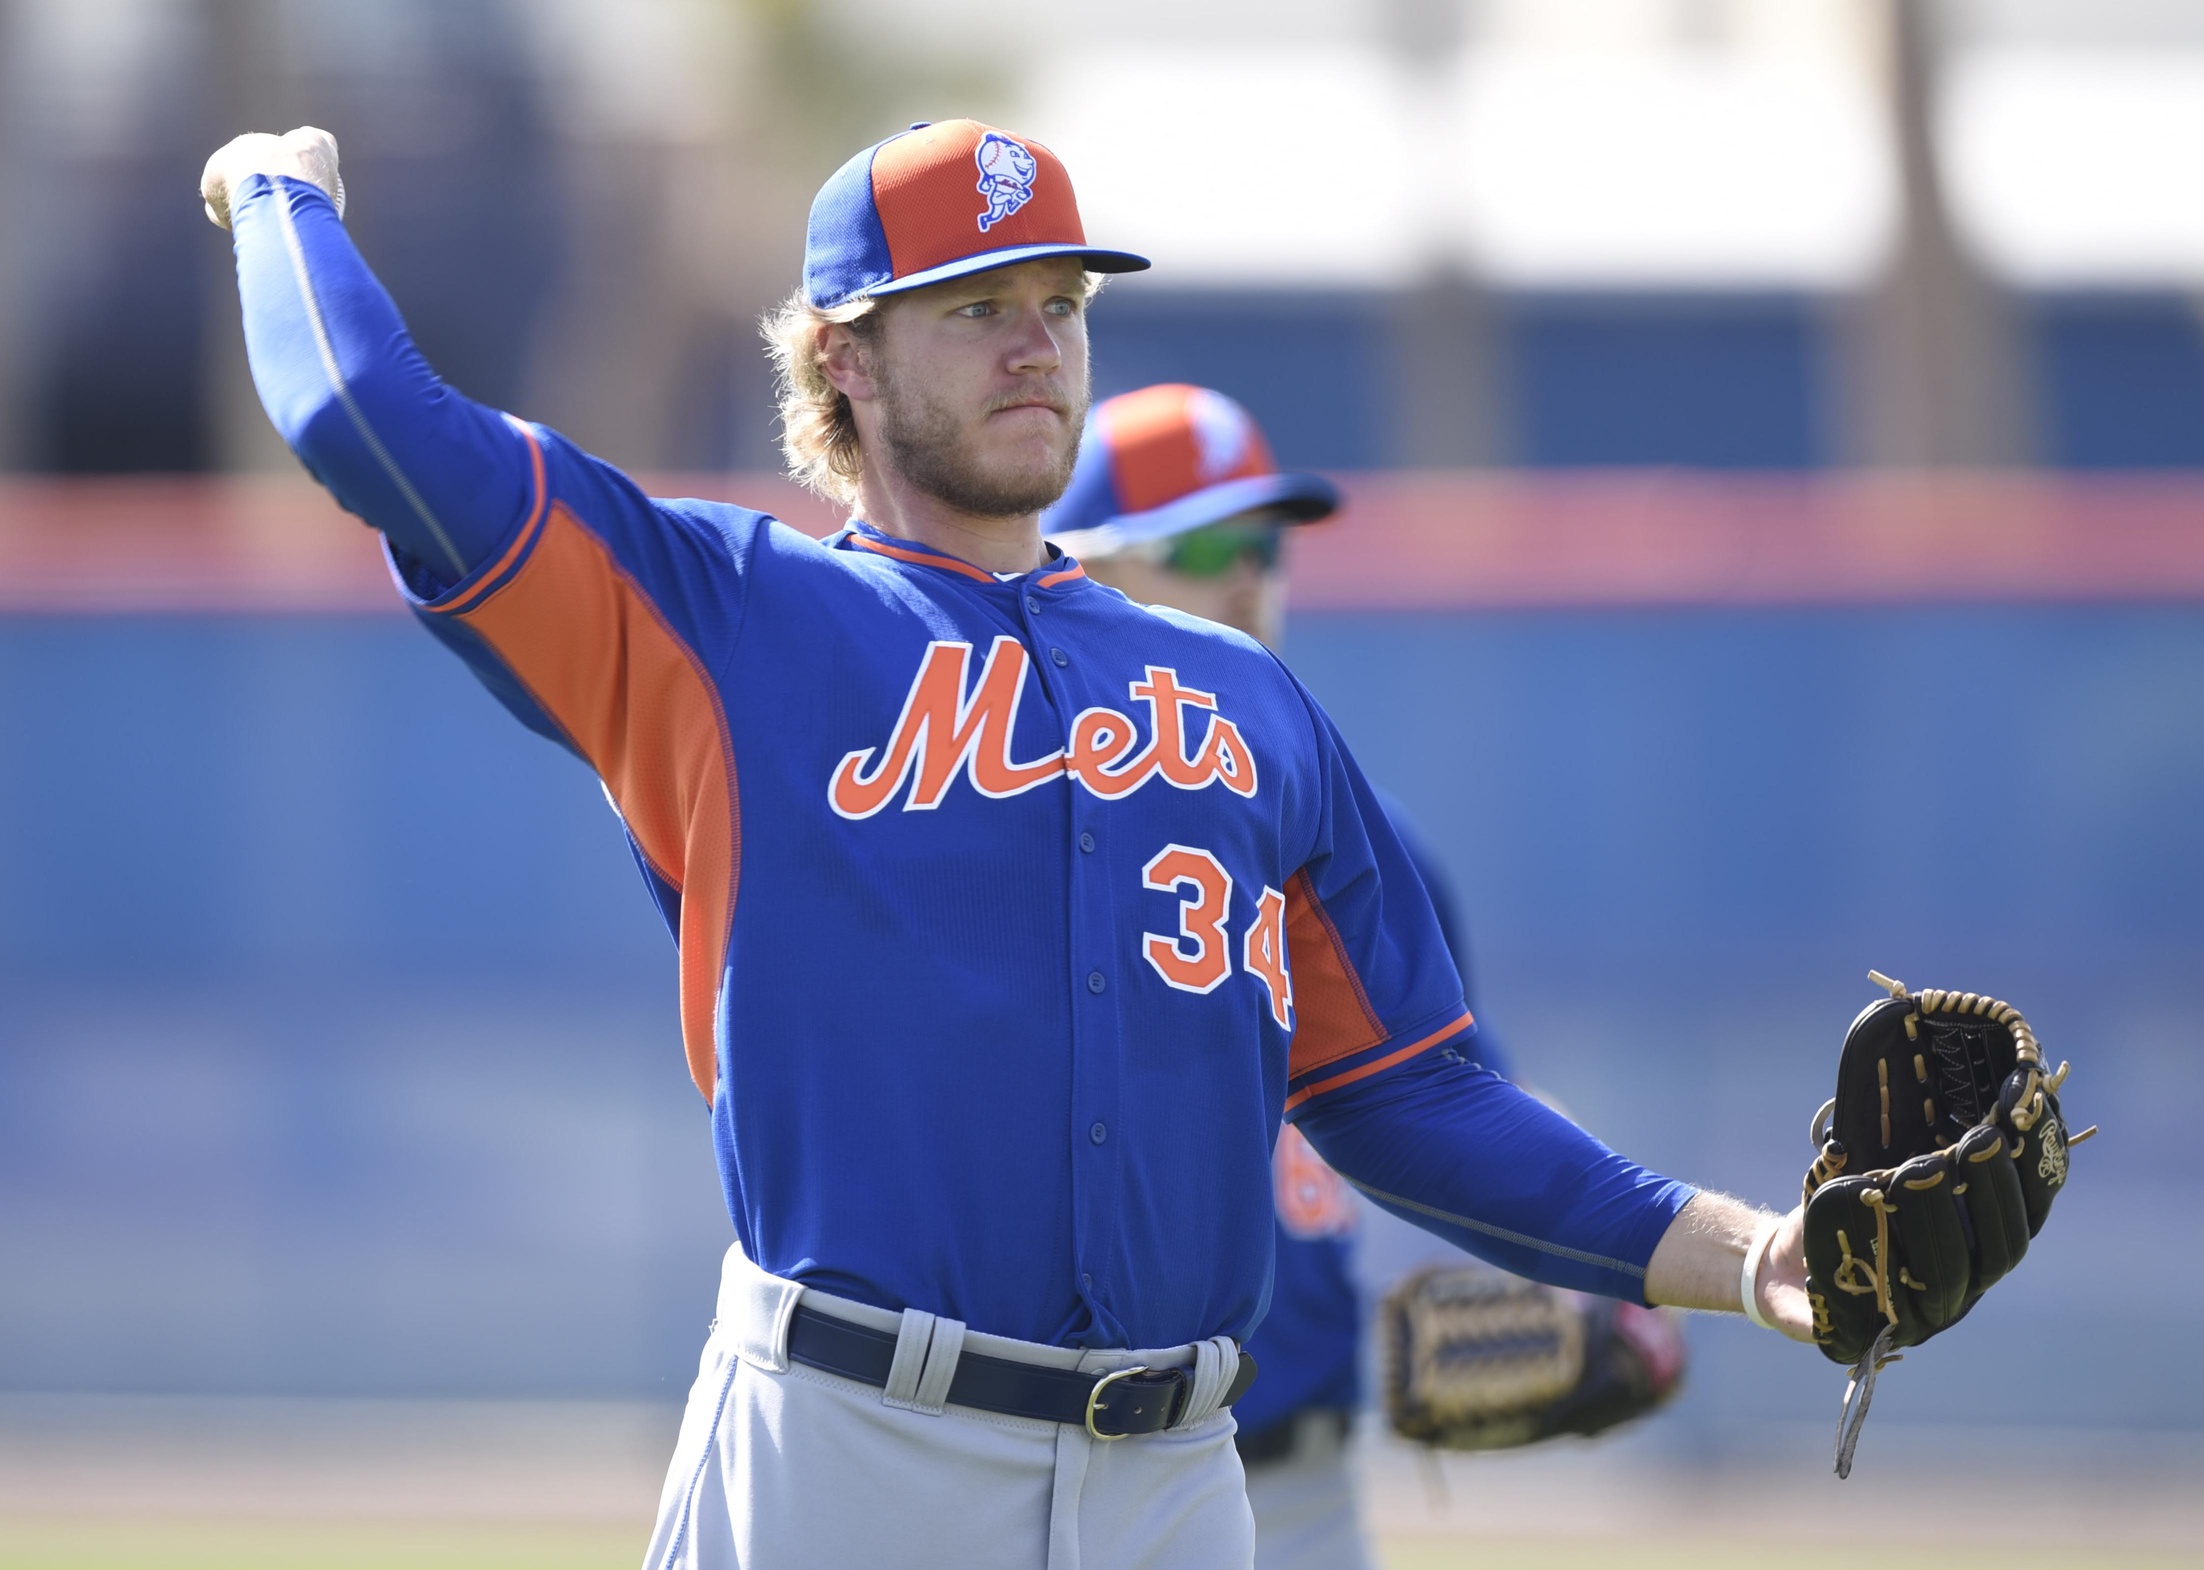 Mets throw out rookie's lunch to teach him a lesson